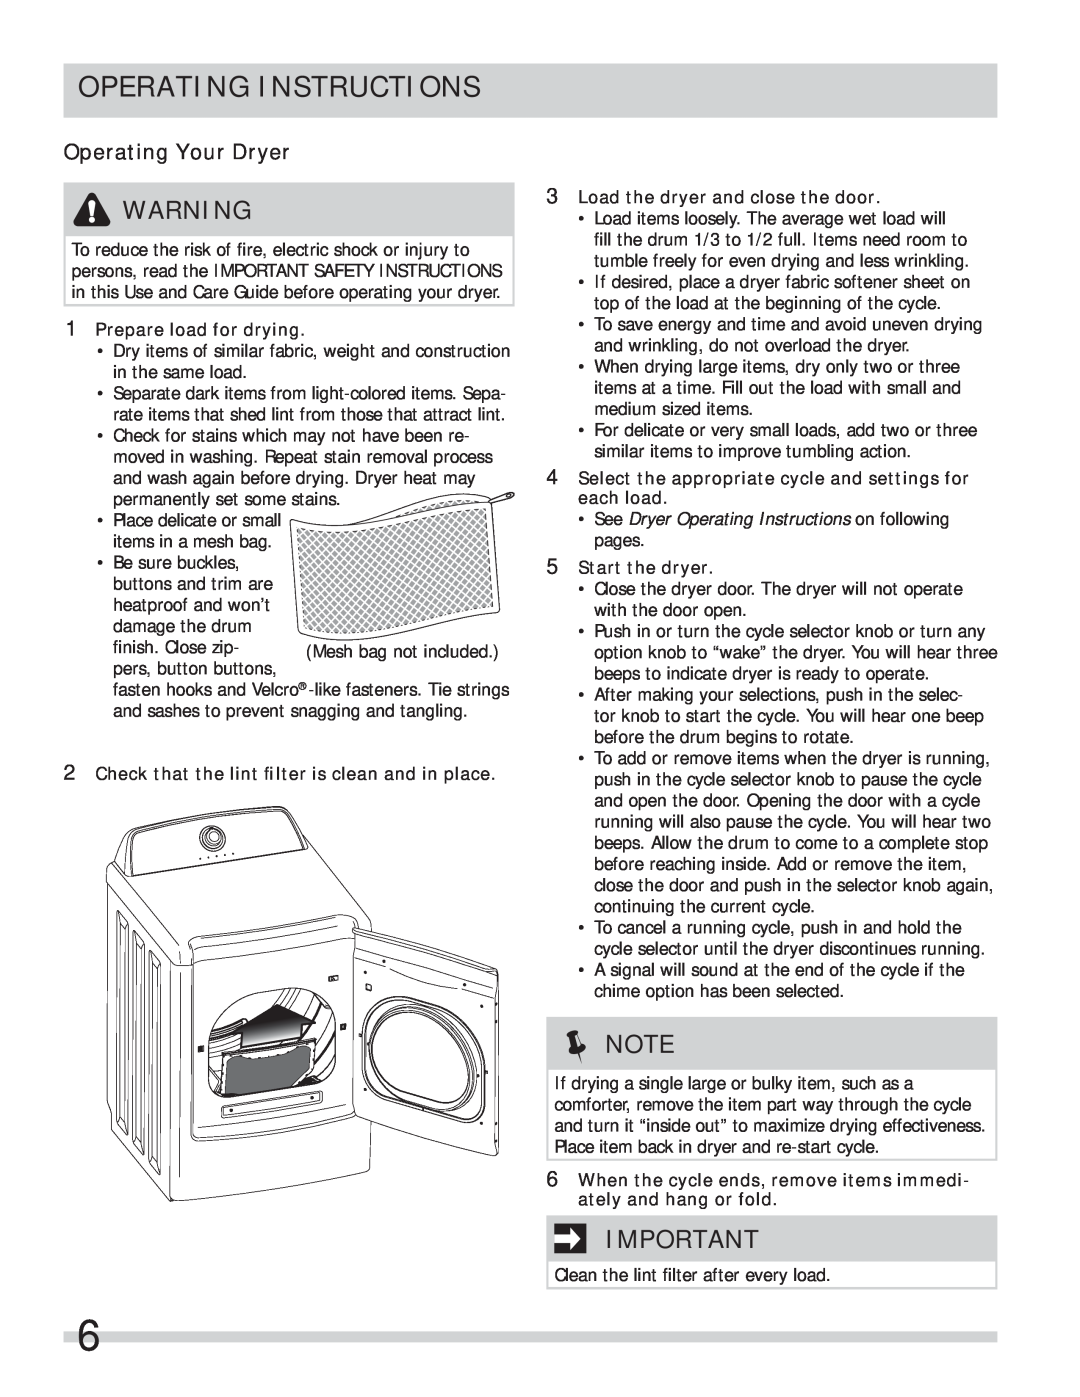 Frigidaire FARE1011MW Operating Your Dryer, Operating Instructions, Prepare load for drying, Start the dryer 